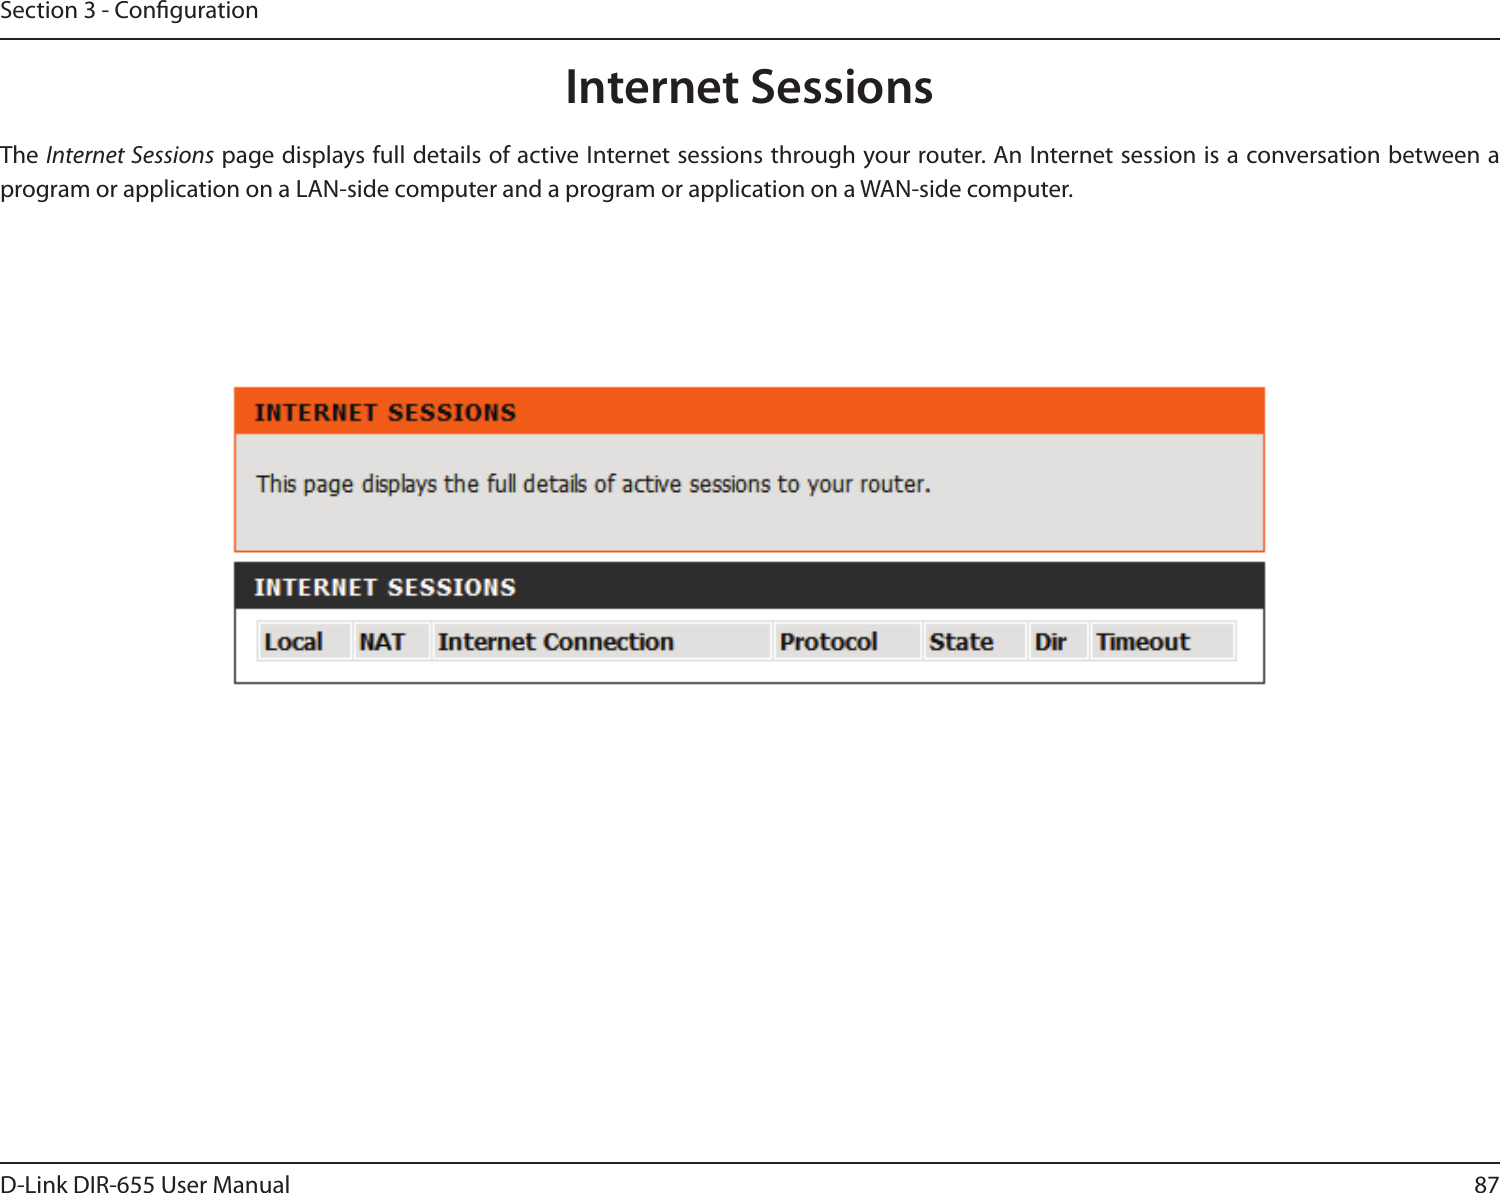 87D-Link DIR-655 User ManualSection 3 - CongurationInternet SessionsThe Internet Sessions page displays full details of active Internet sessions through your router. An Internet session is a conversation between a program or application on a LAN-side computer and a program or application on a WAN-side computer. 